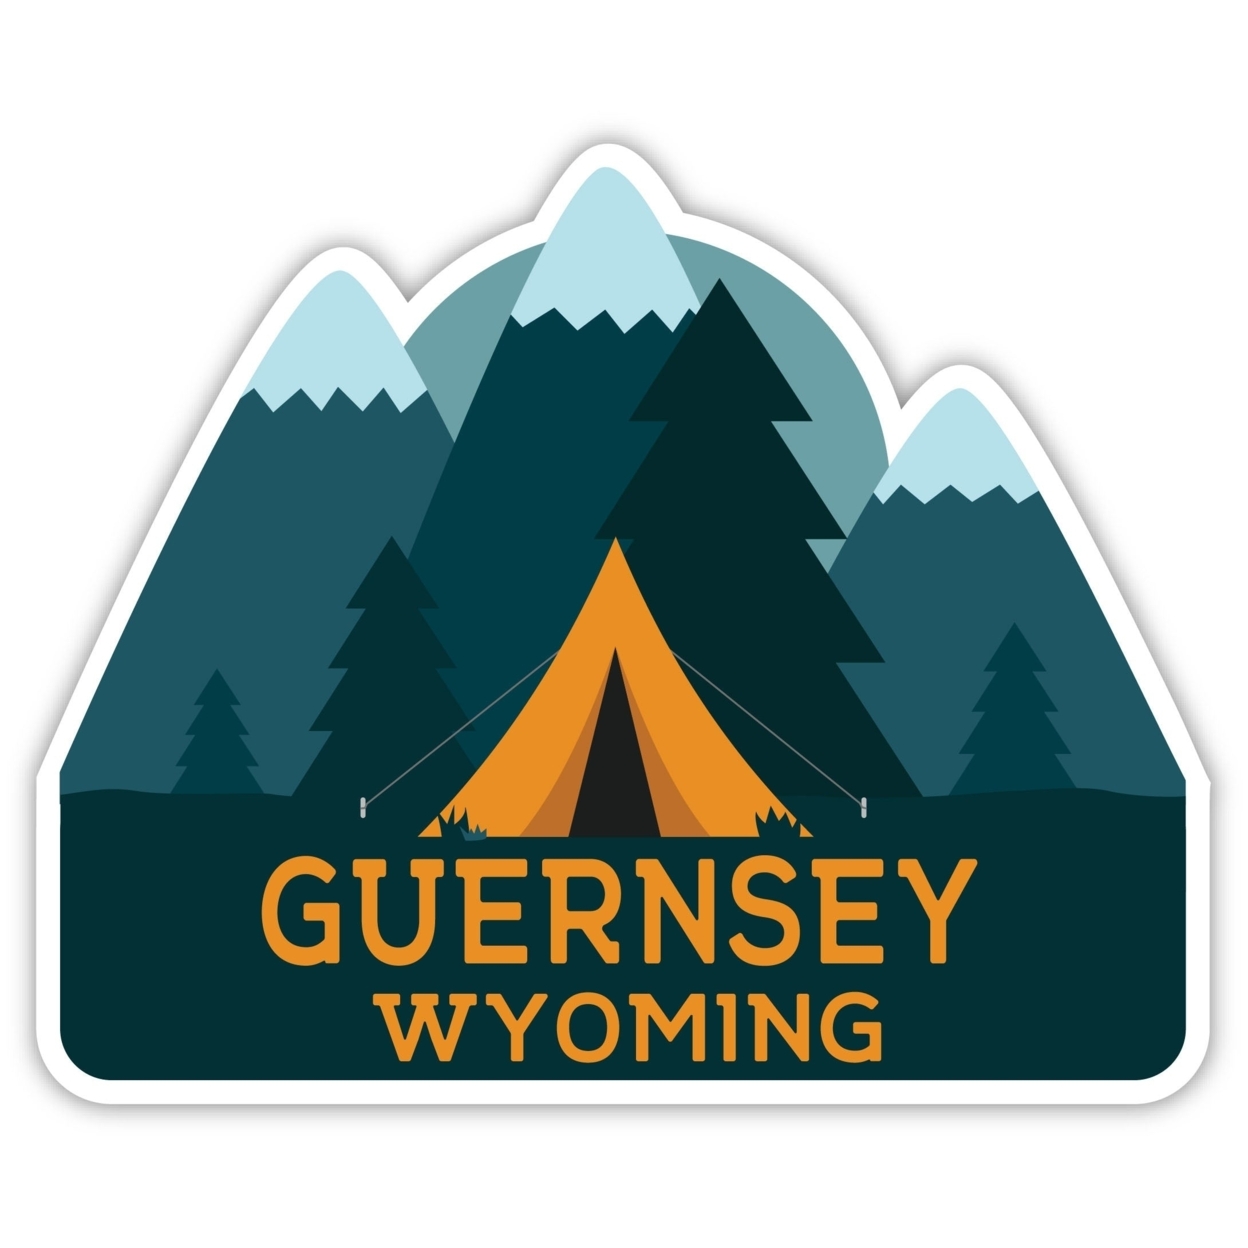 Guernsey Wyoming Souvenir Decorative Stickers (Choose Theme And Size) - Single Unit, 8-Inch, Tent